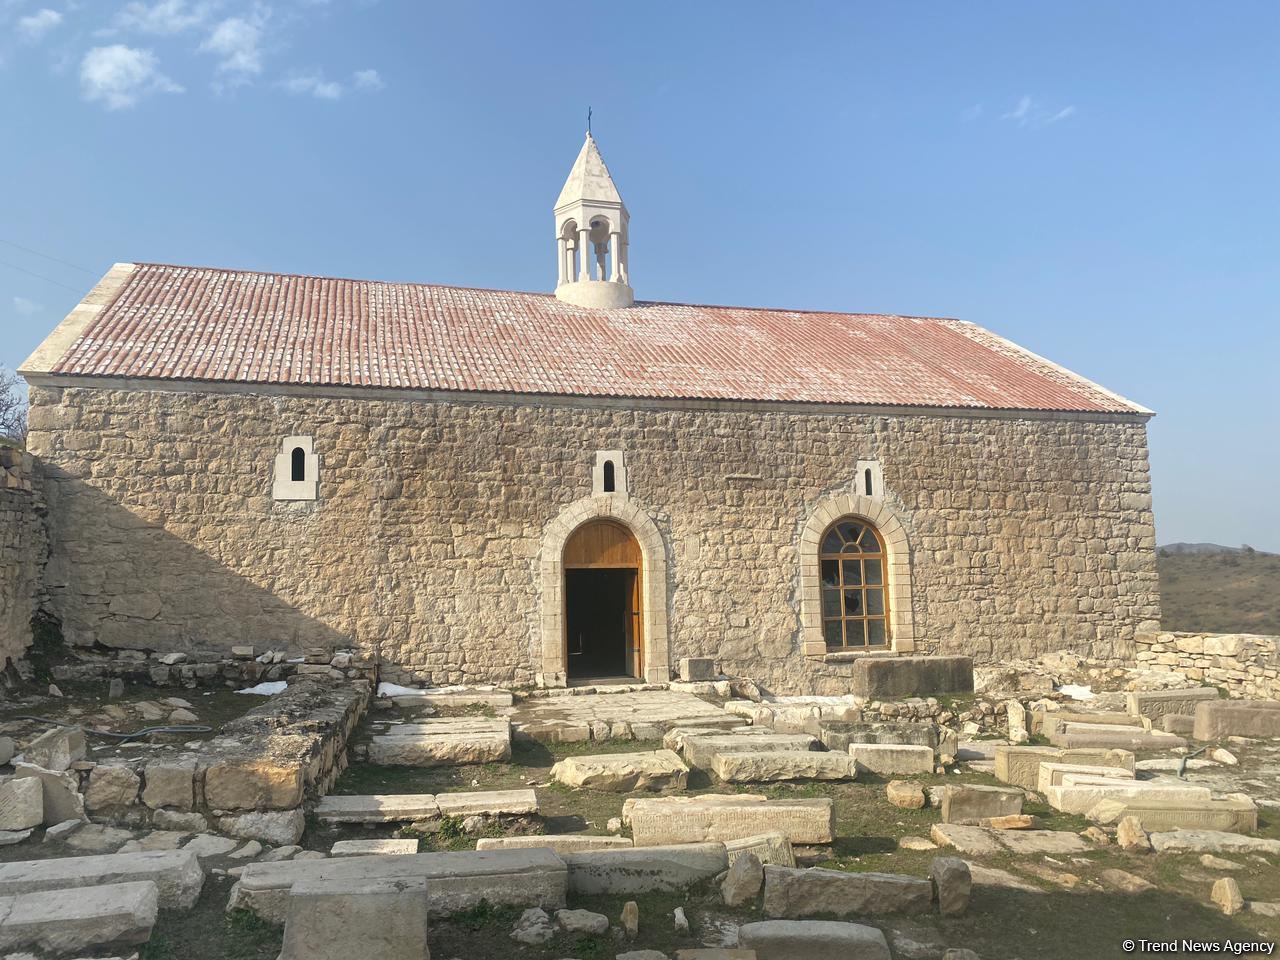 Trend TV reports from St. John's Church in Khojavand's Tugh village